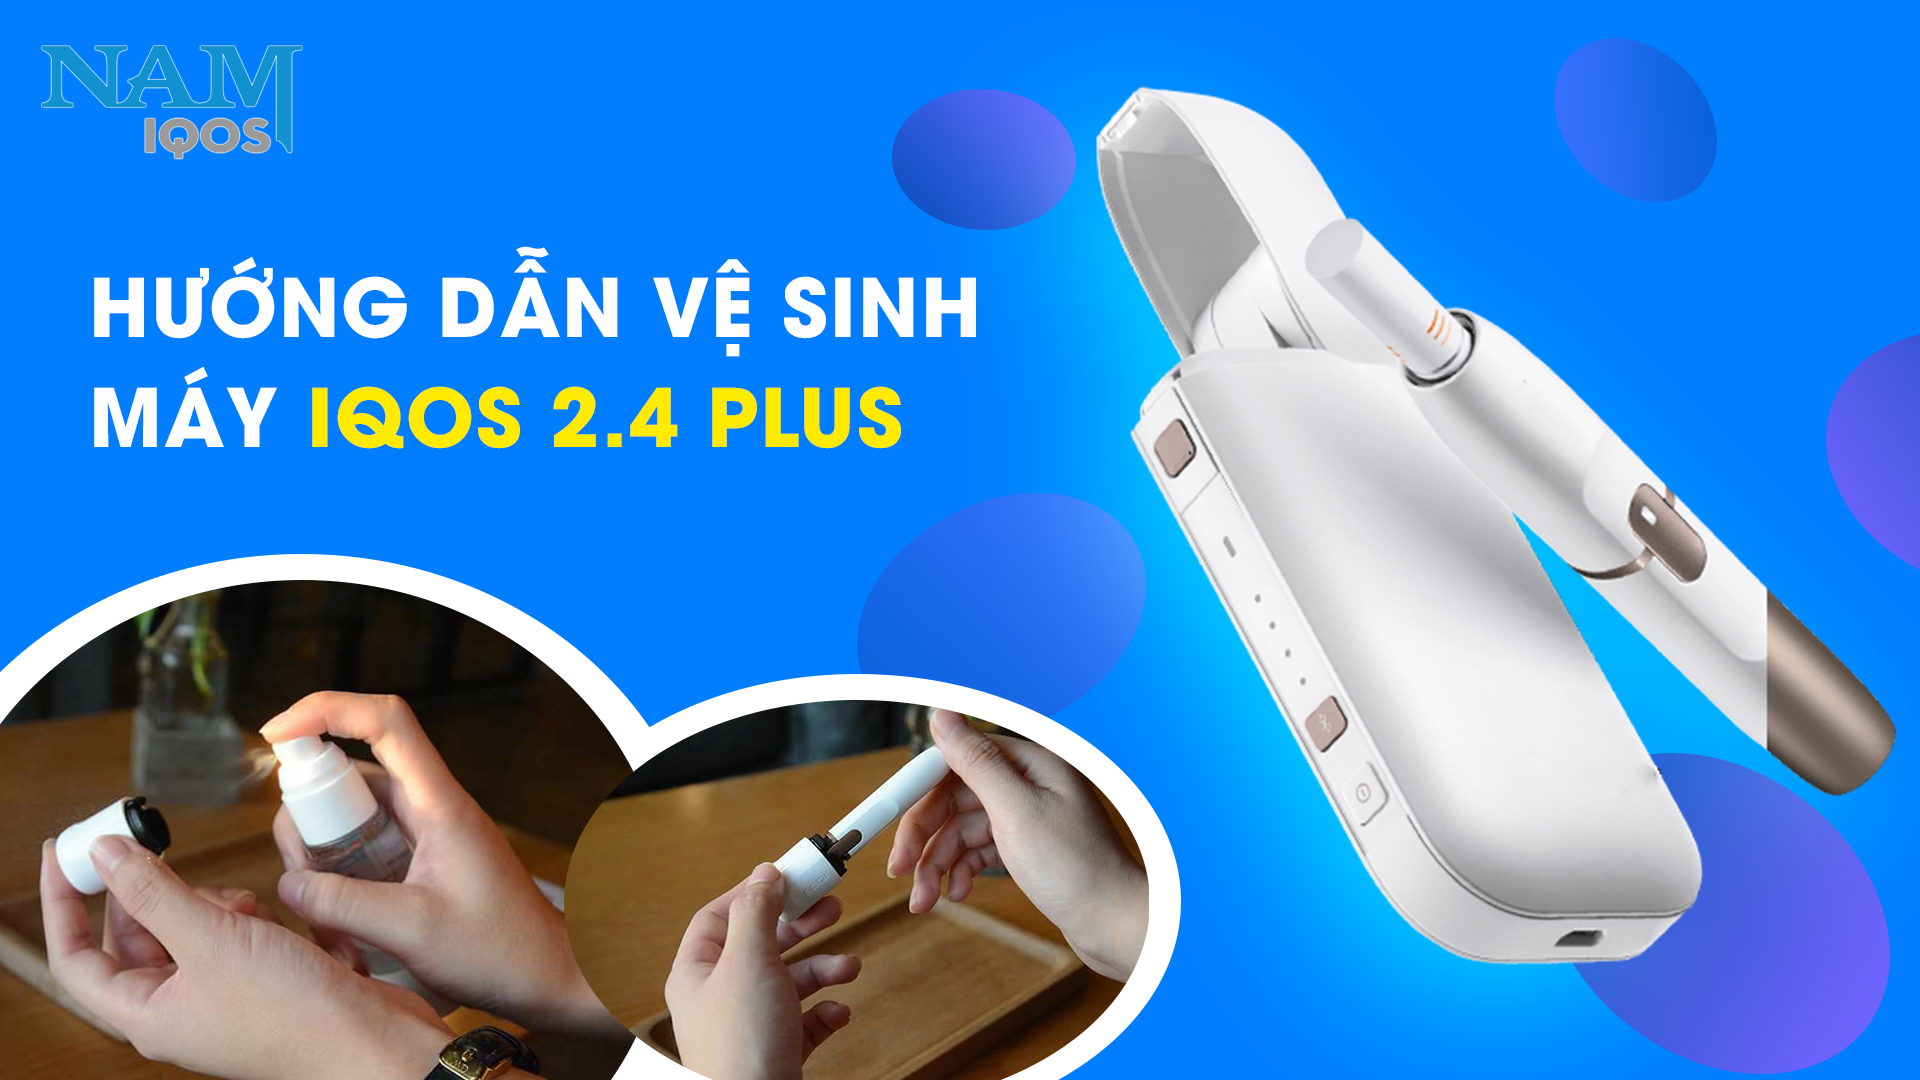 Dịch vụ Southside iQOS